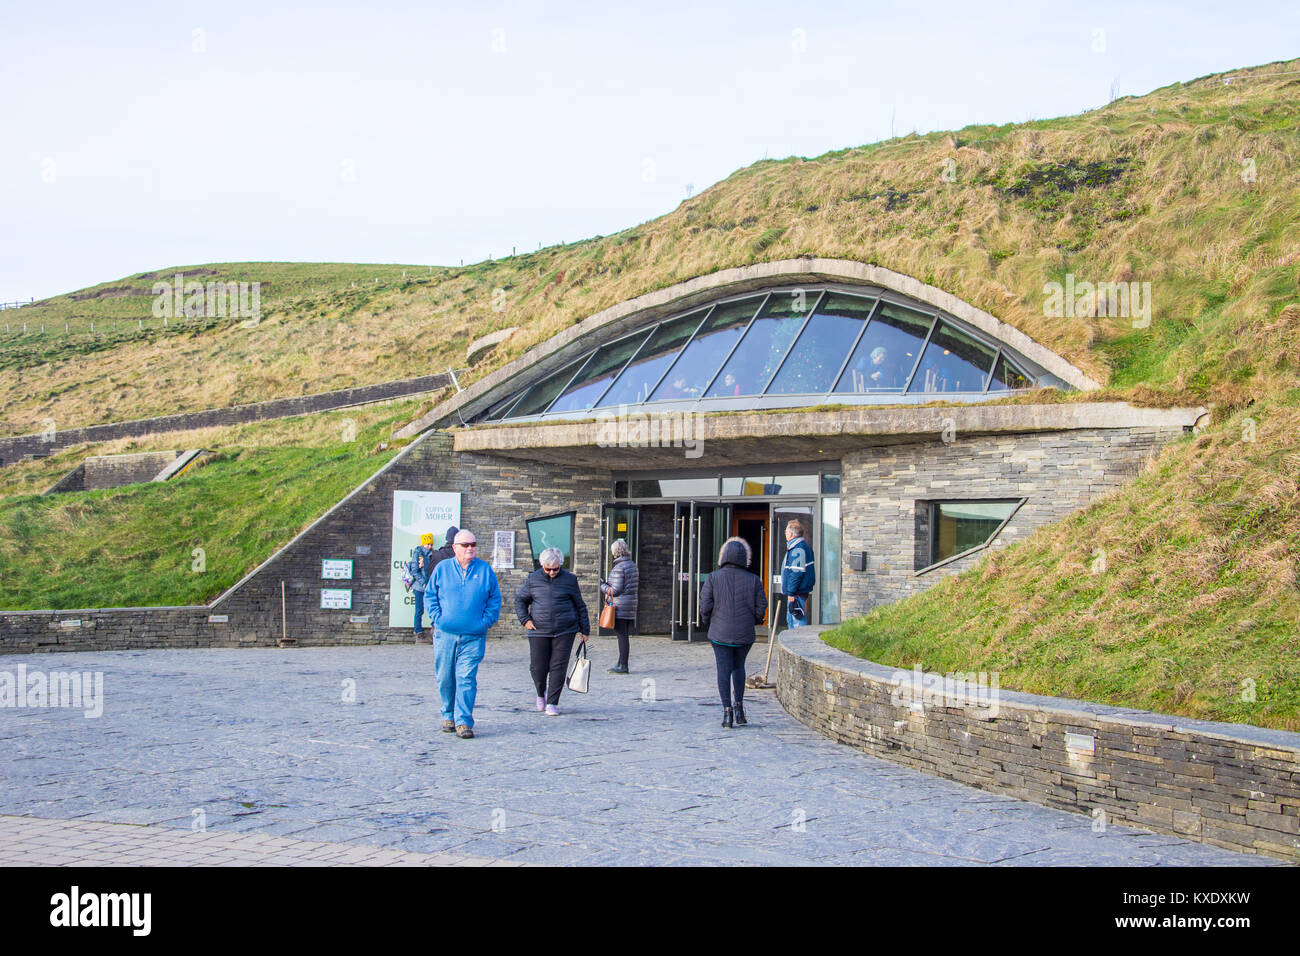 Visitors Center, Cliffs of Moher, County Clare, Irland Stockfoto